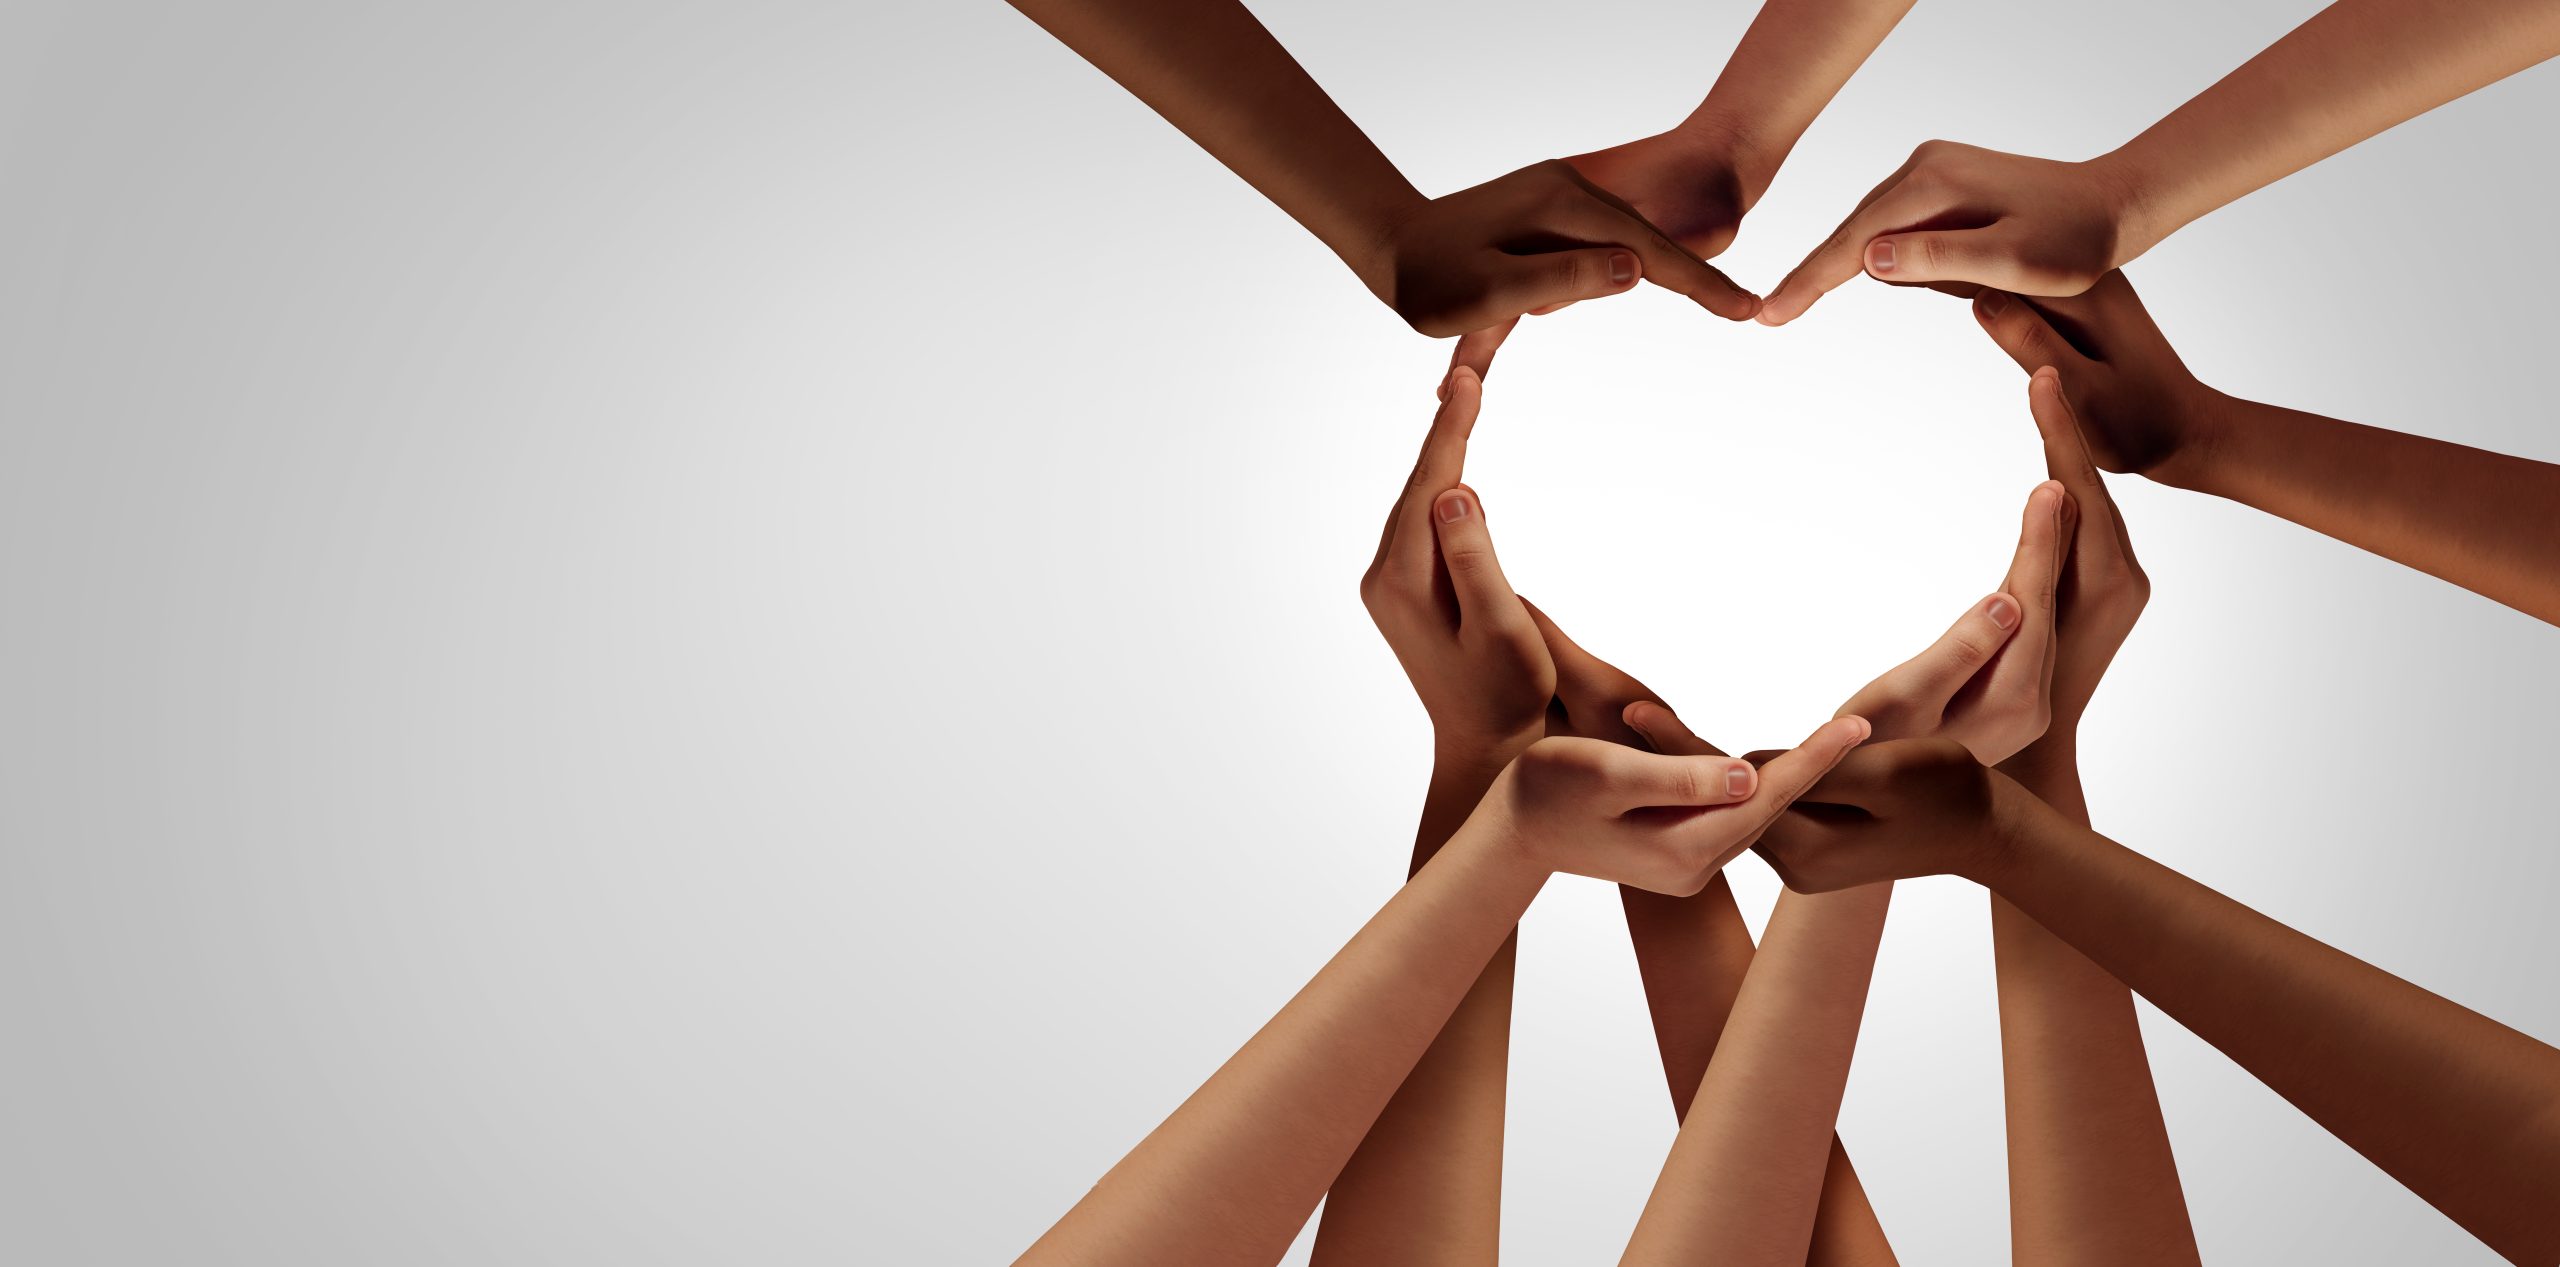 Unity,And,Diversity,Partnership,As,Heart,Hands,In,A,Group